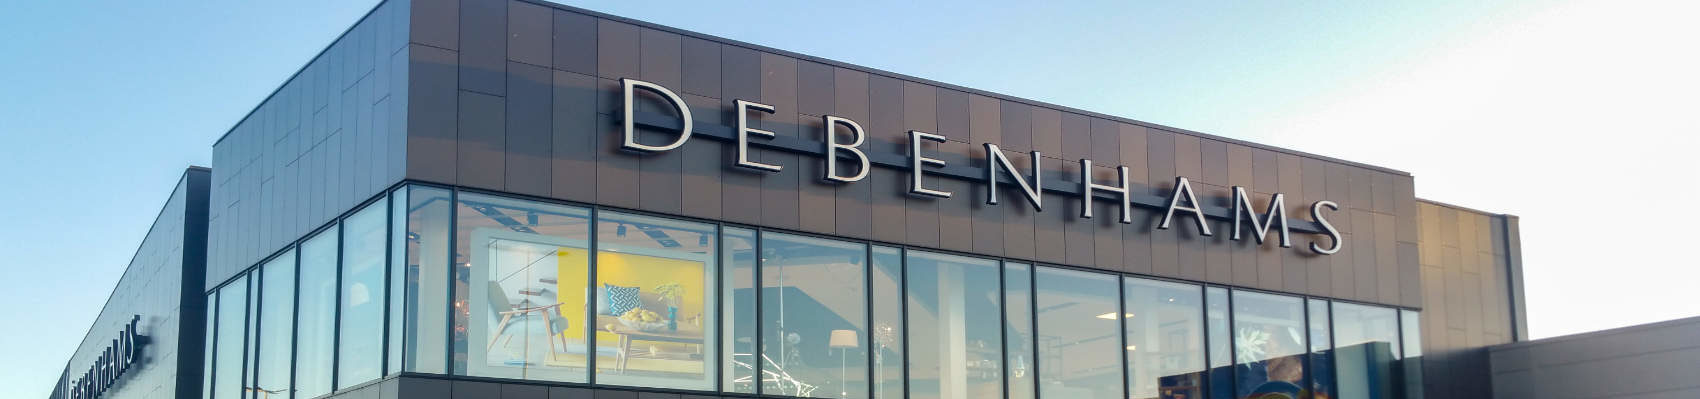 Debenhams have secured a cash flow as they continue to struggle